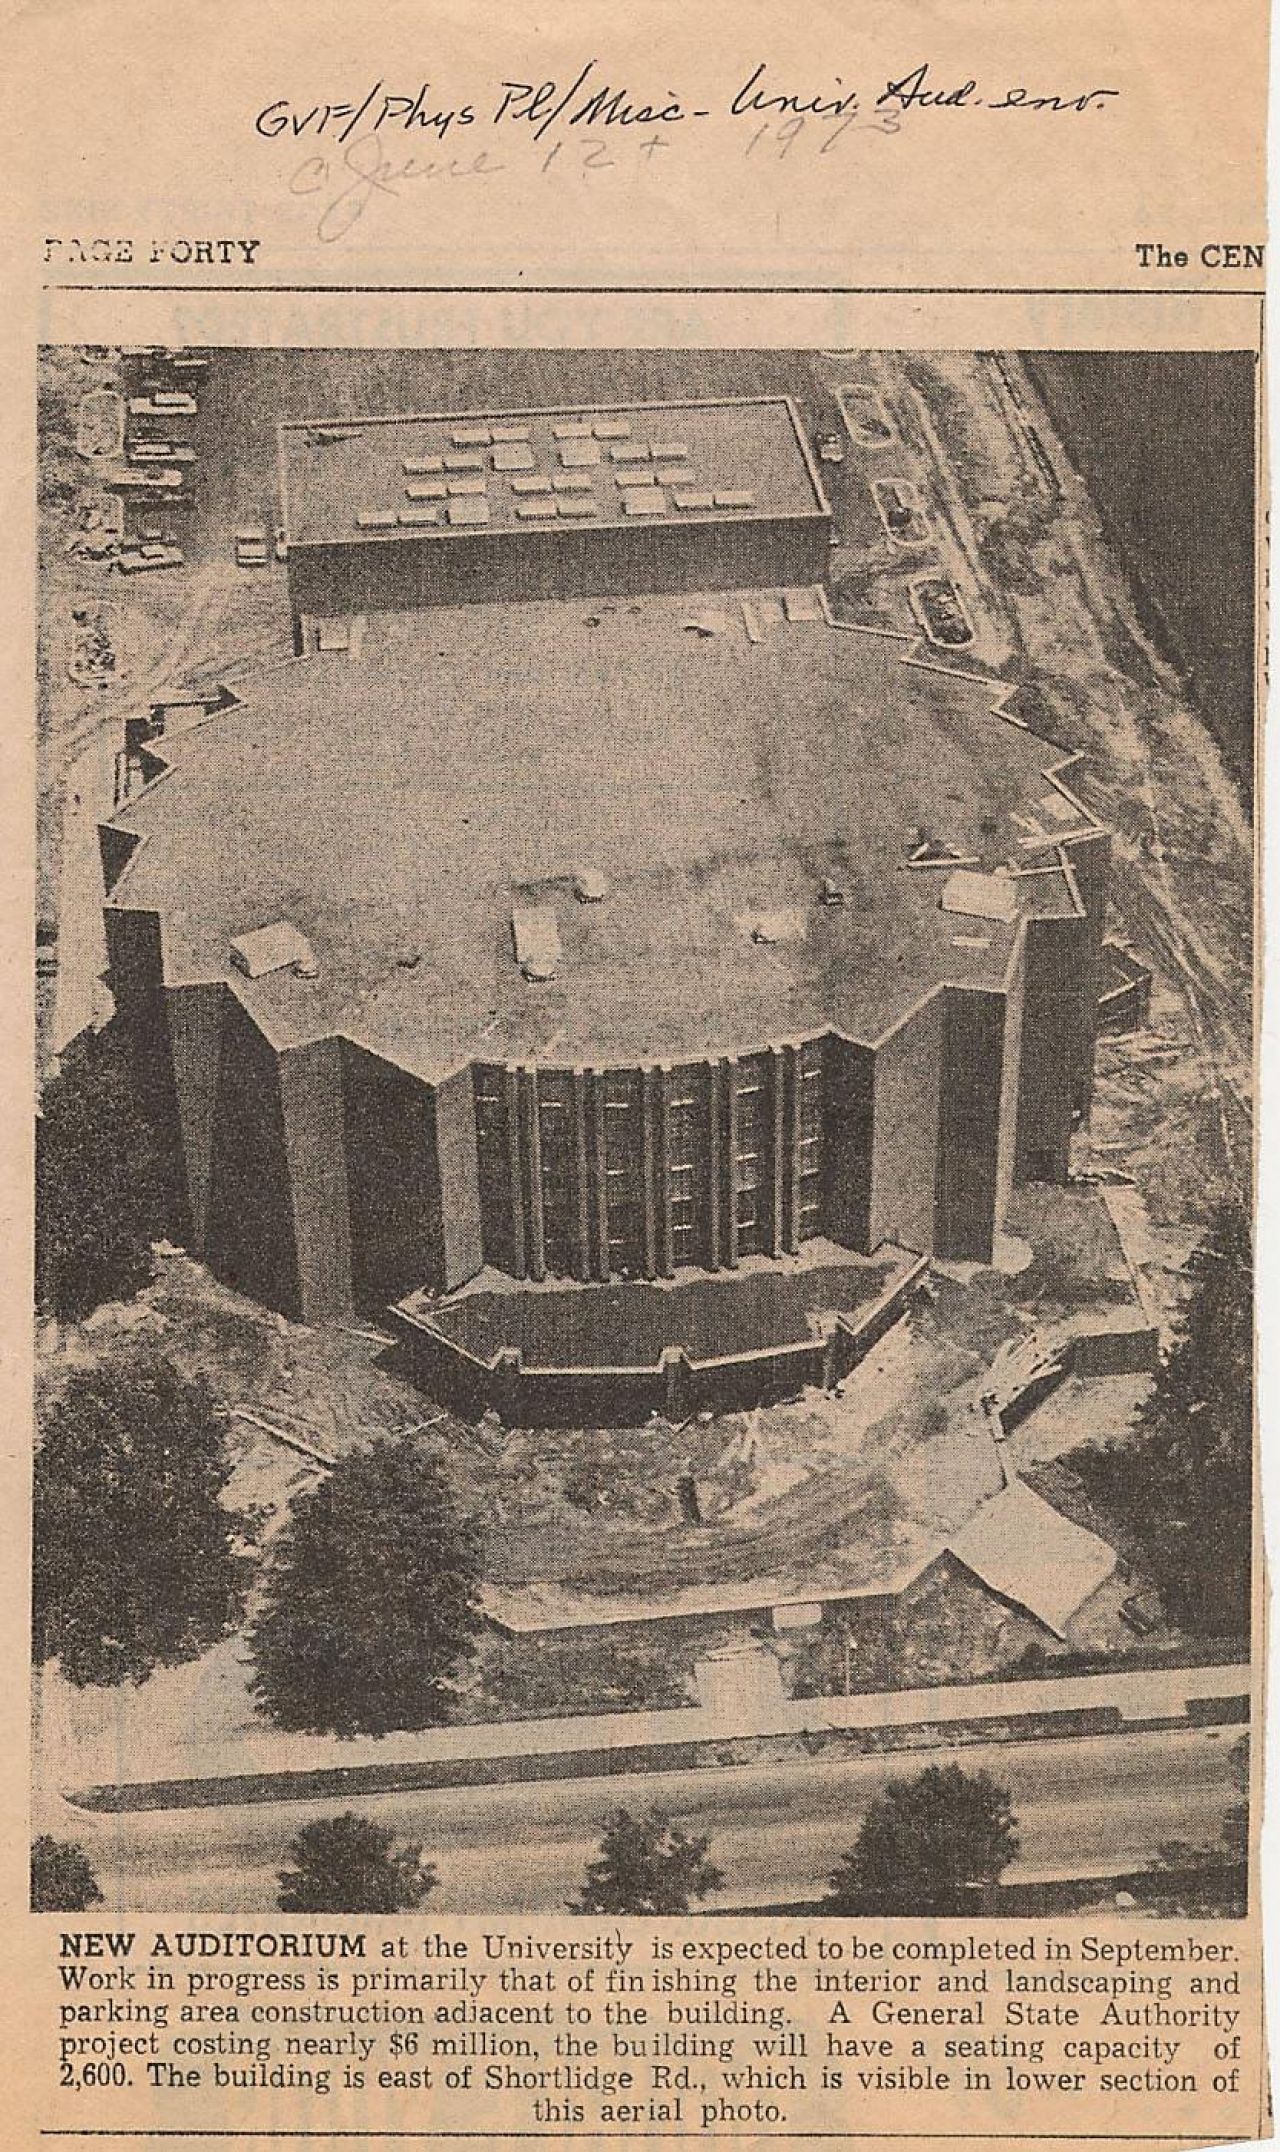 An archival newspaper clipping shows a bird's-eye view of a large brick building.